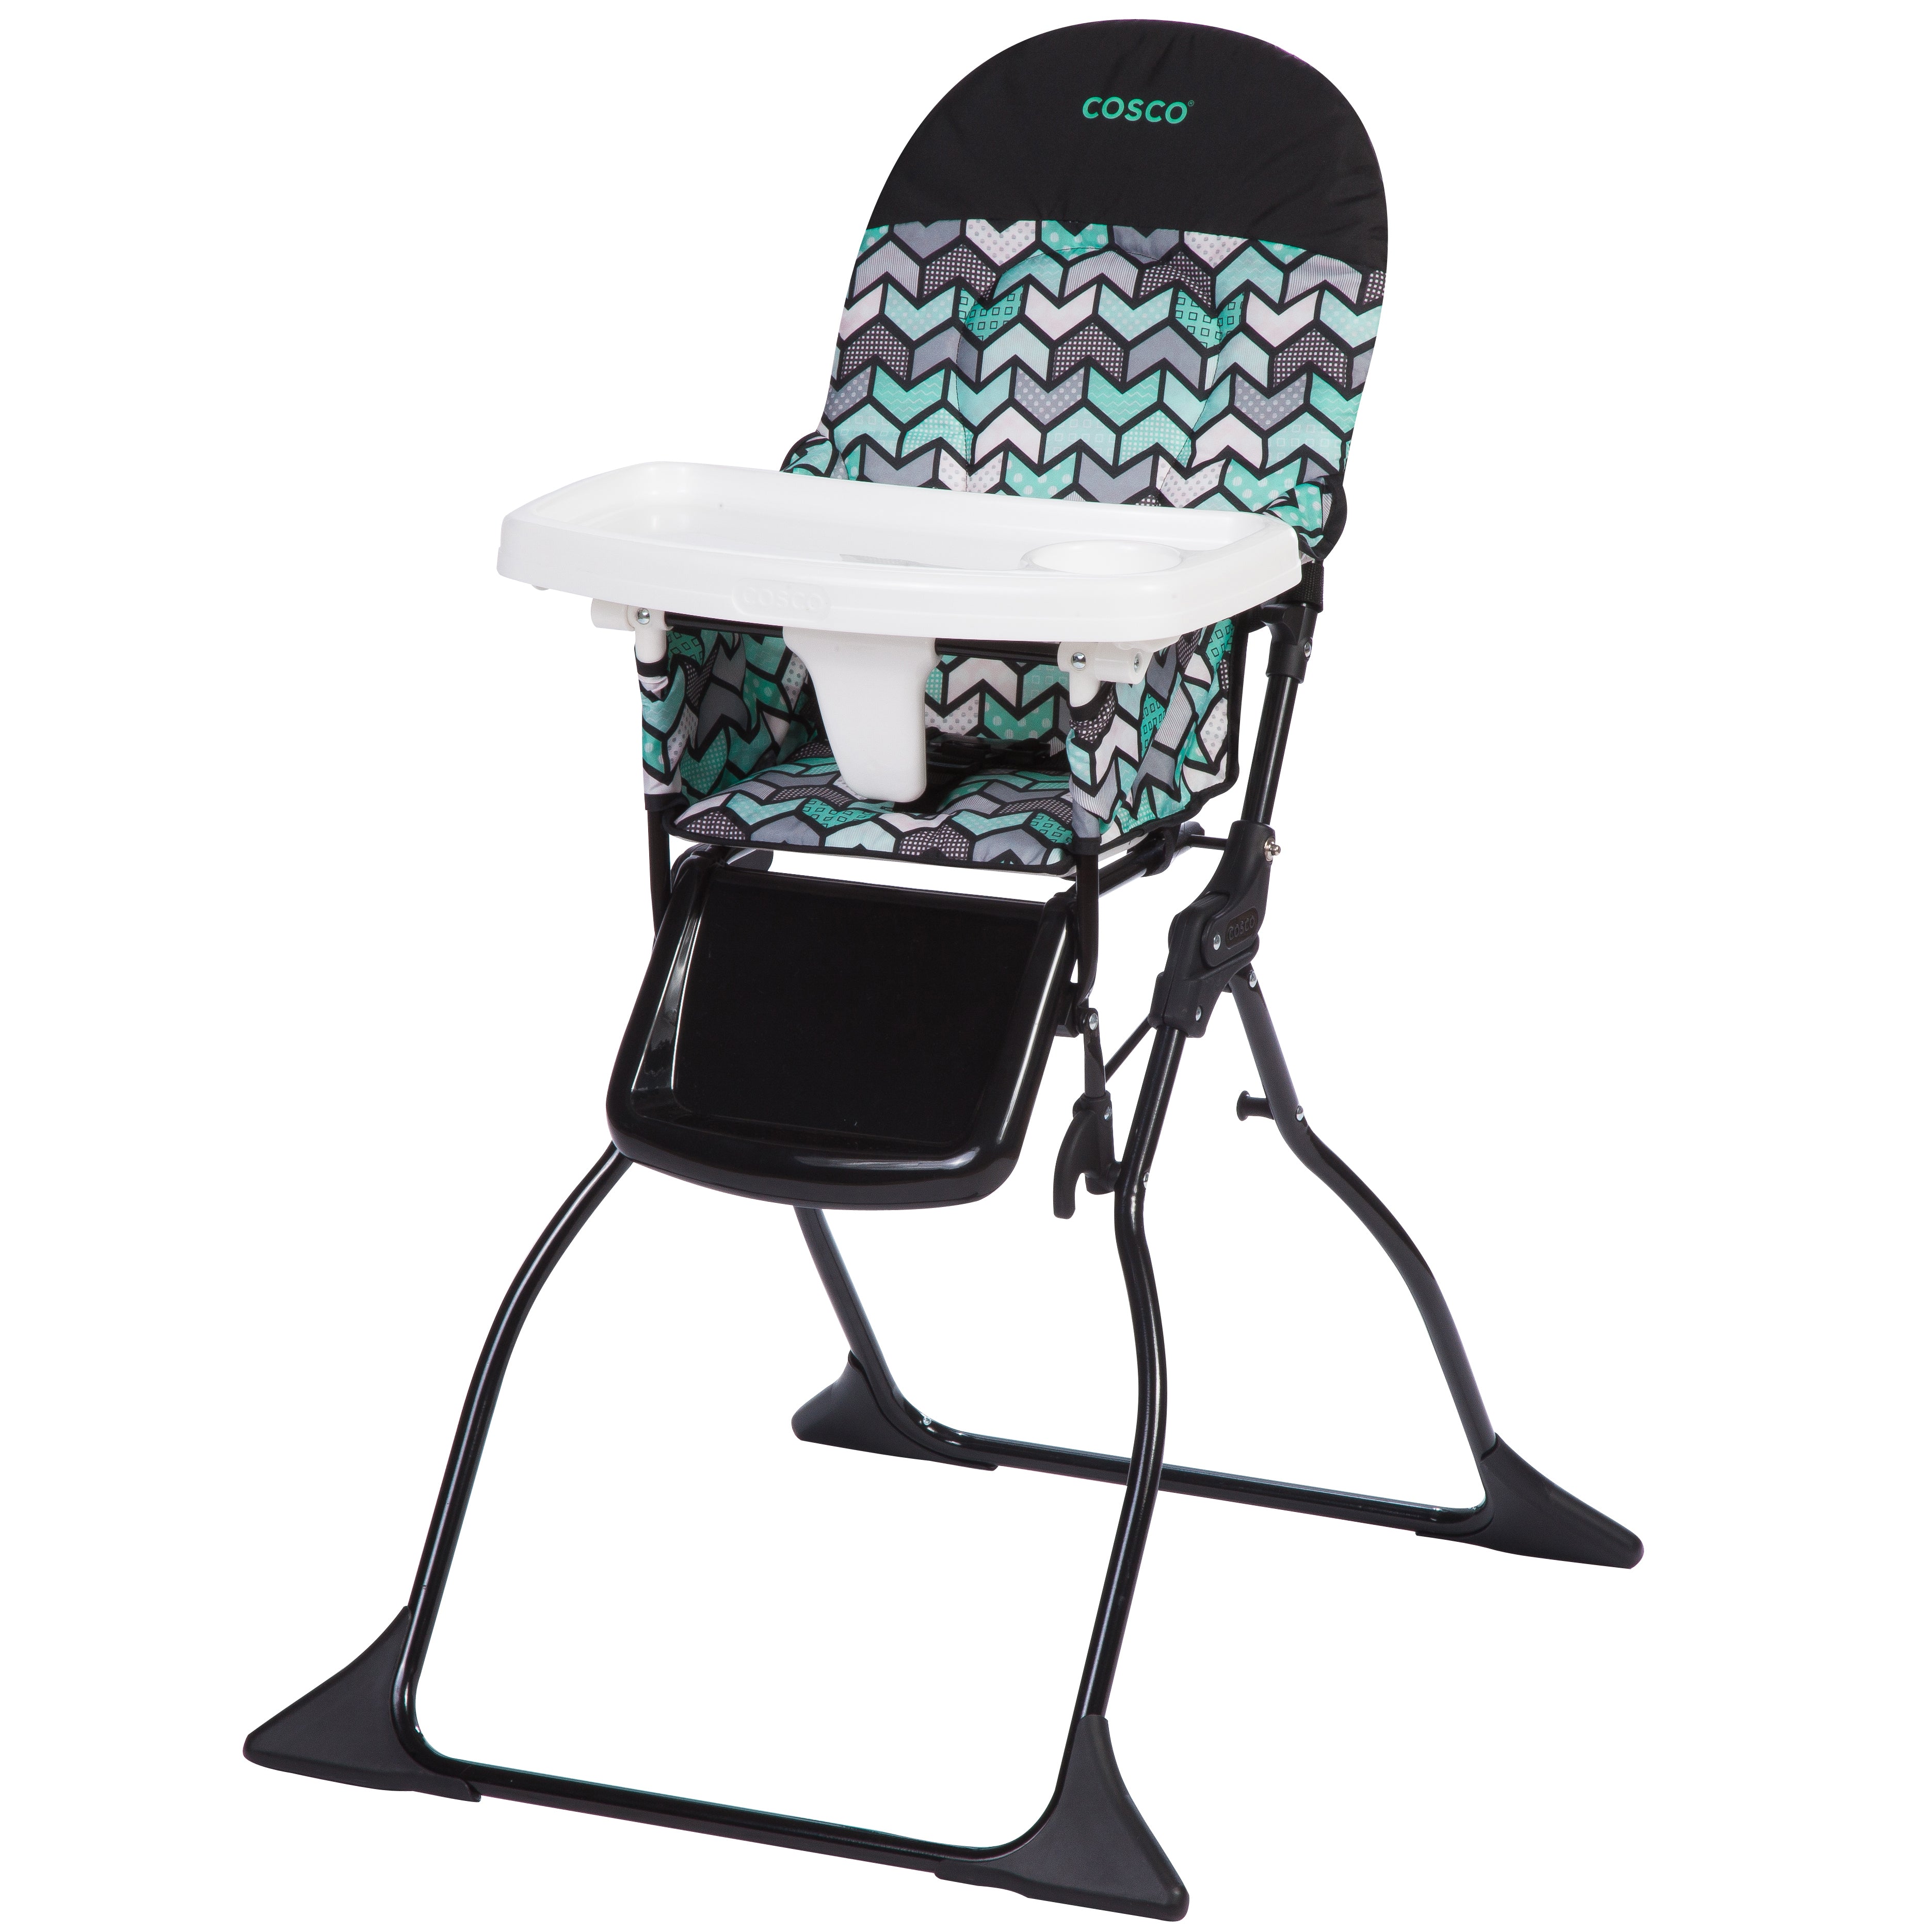 Simple Fold™ Full Size High Chair with Adjustable Tray - Spritz